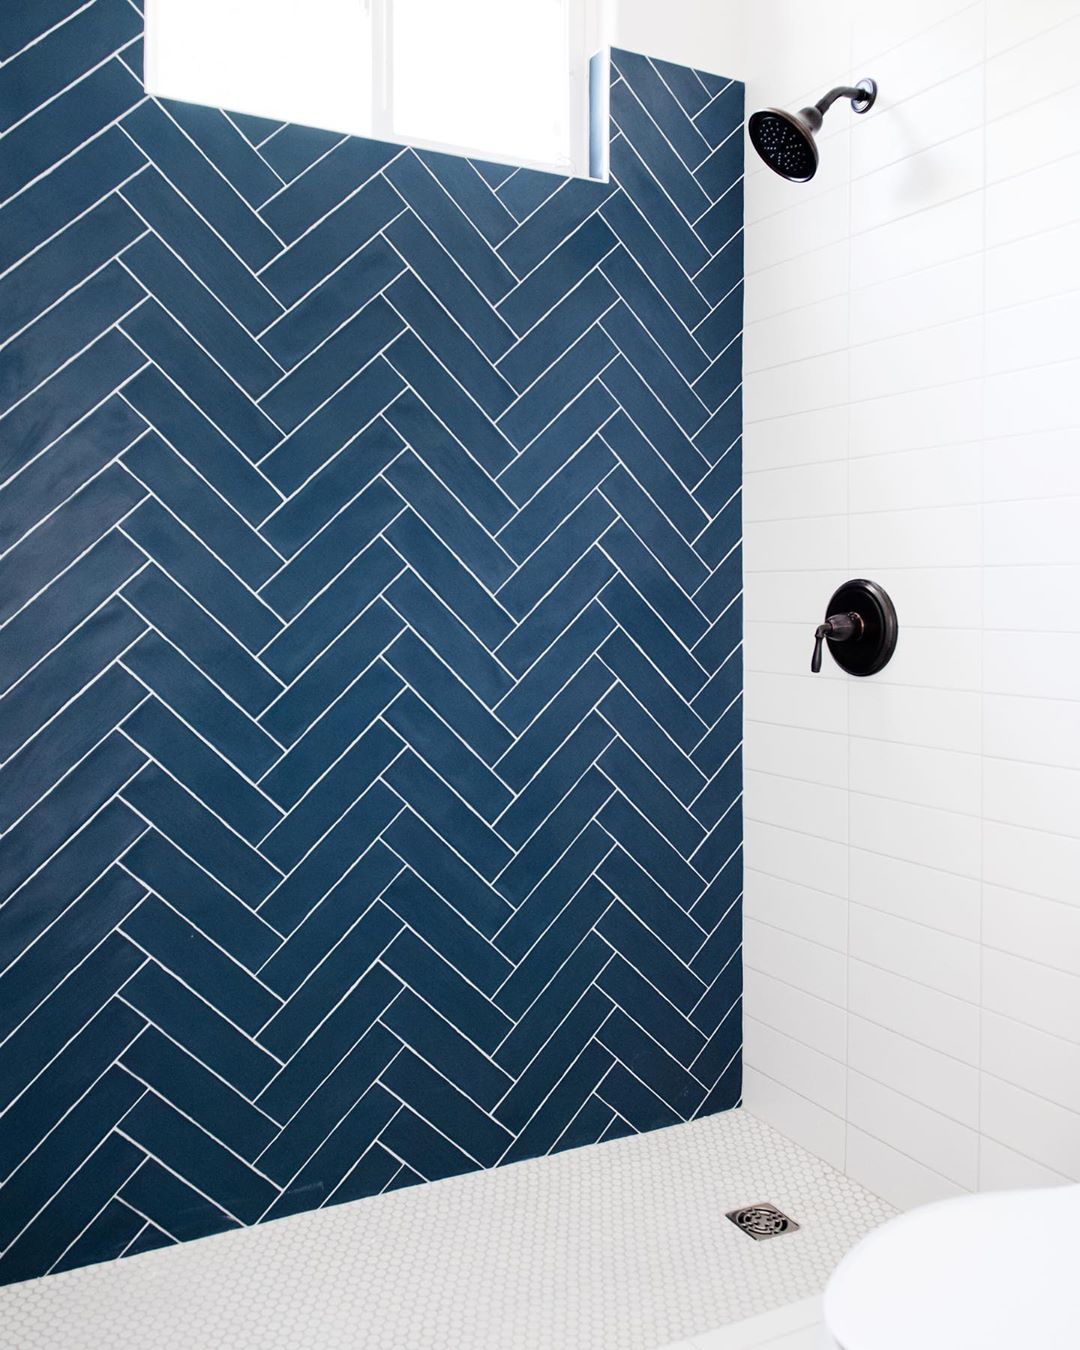 White grout on blue subway tile with white contrast tile used in shower environment 